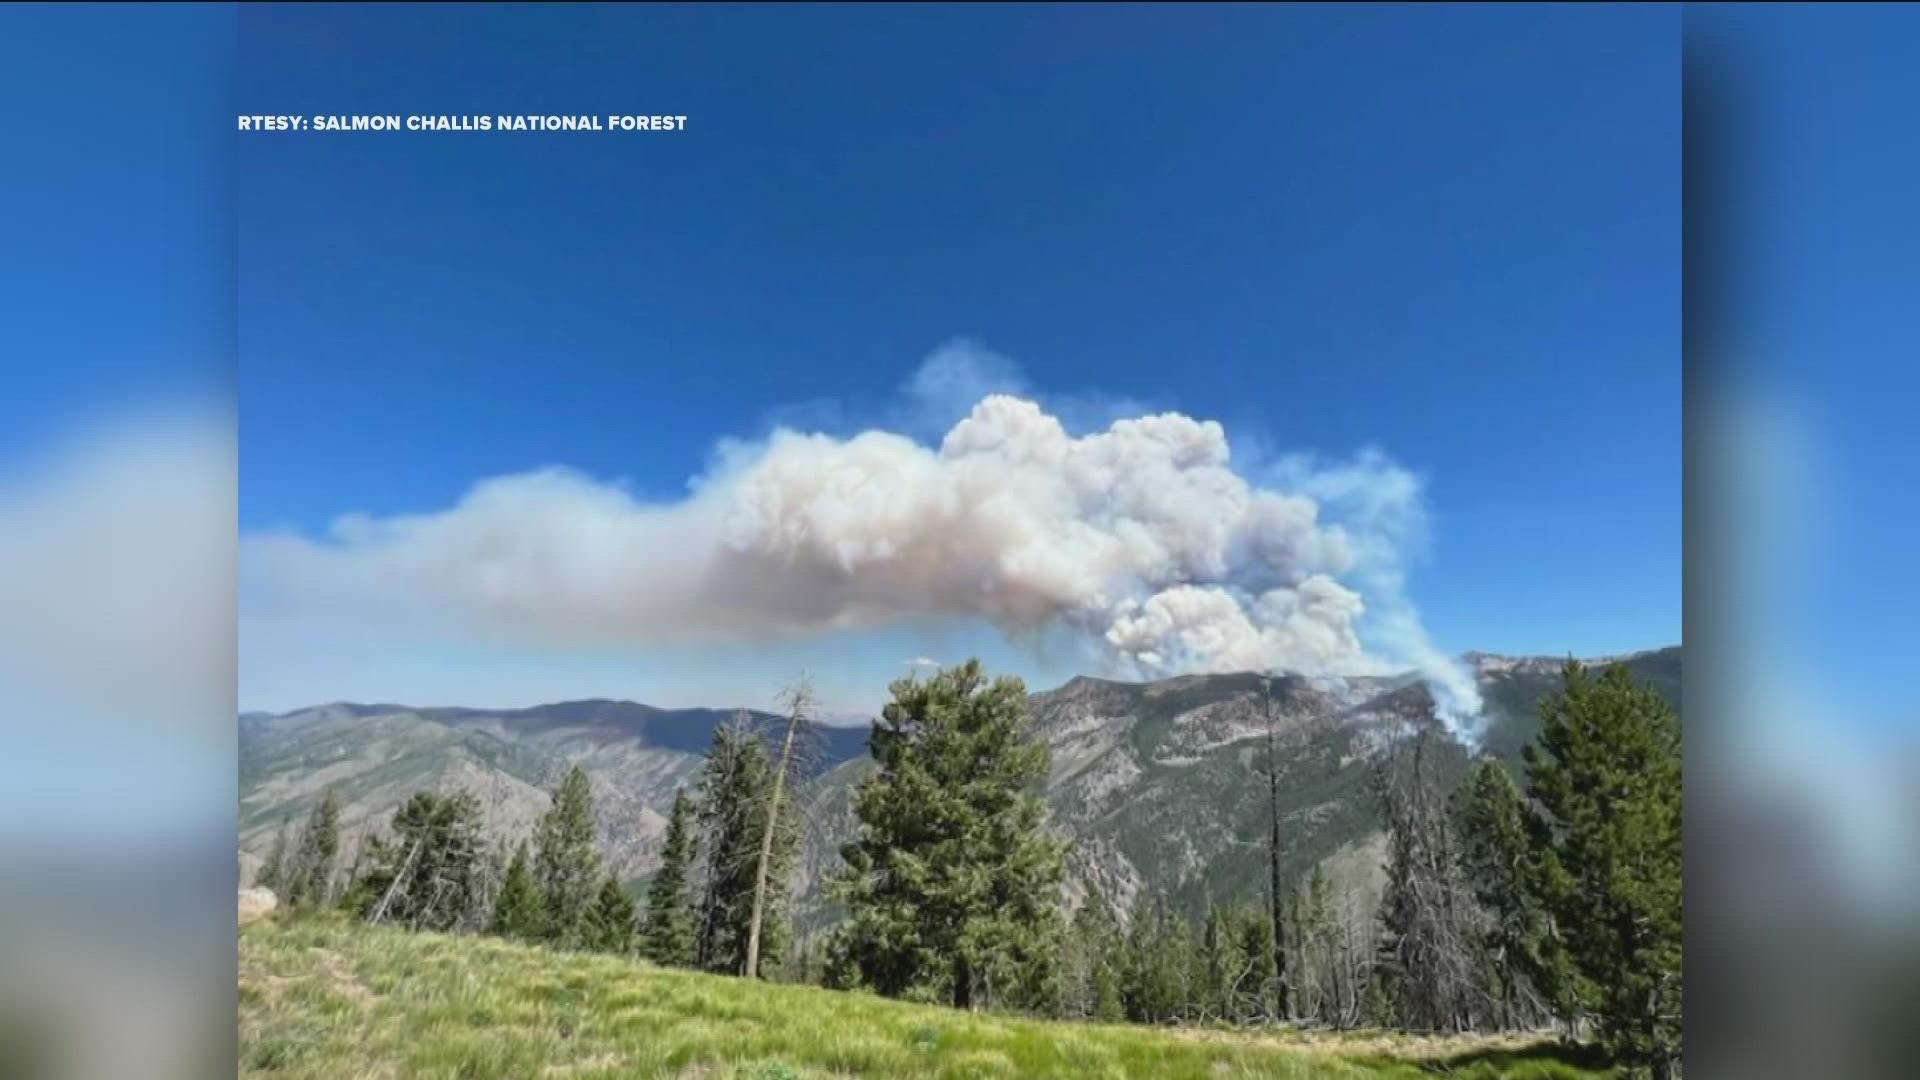 The Woodtick Fire has burned 4,800 acres and was caused by a lightning strike, according to the Salmon-Challis National Forest.